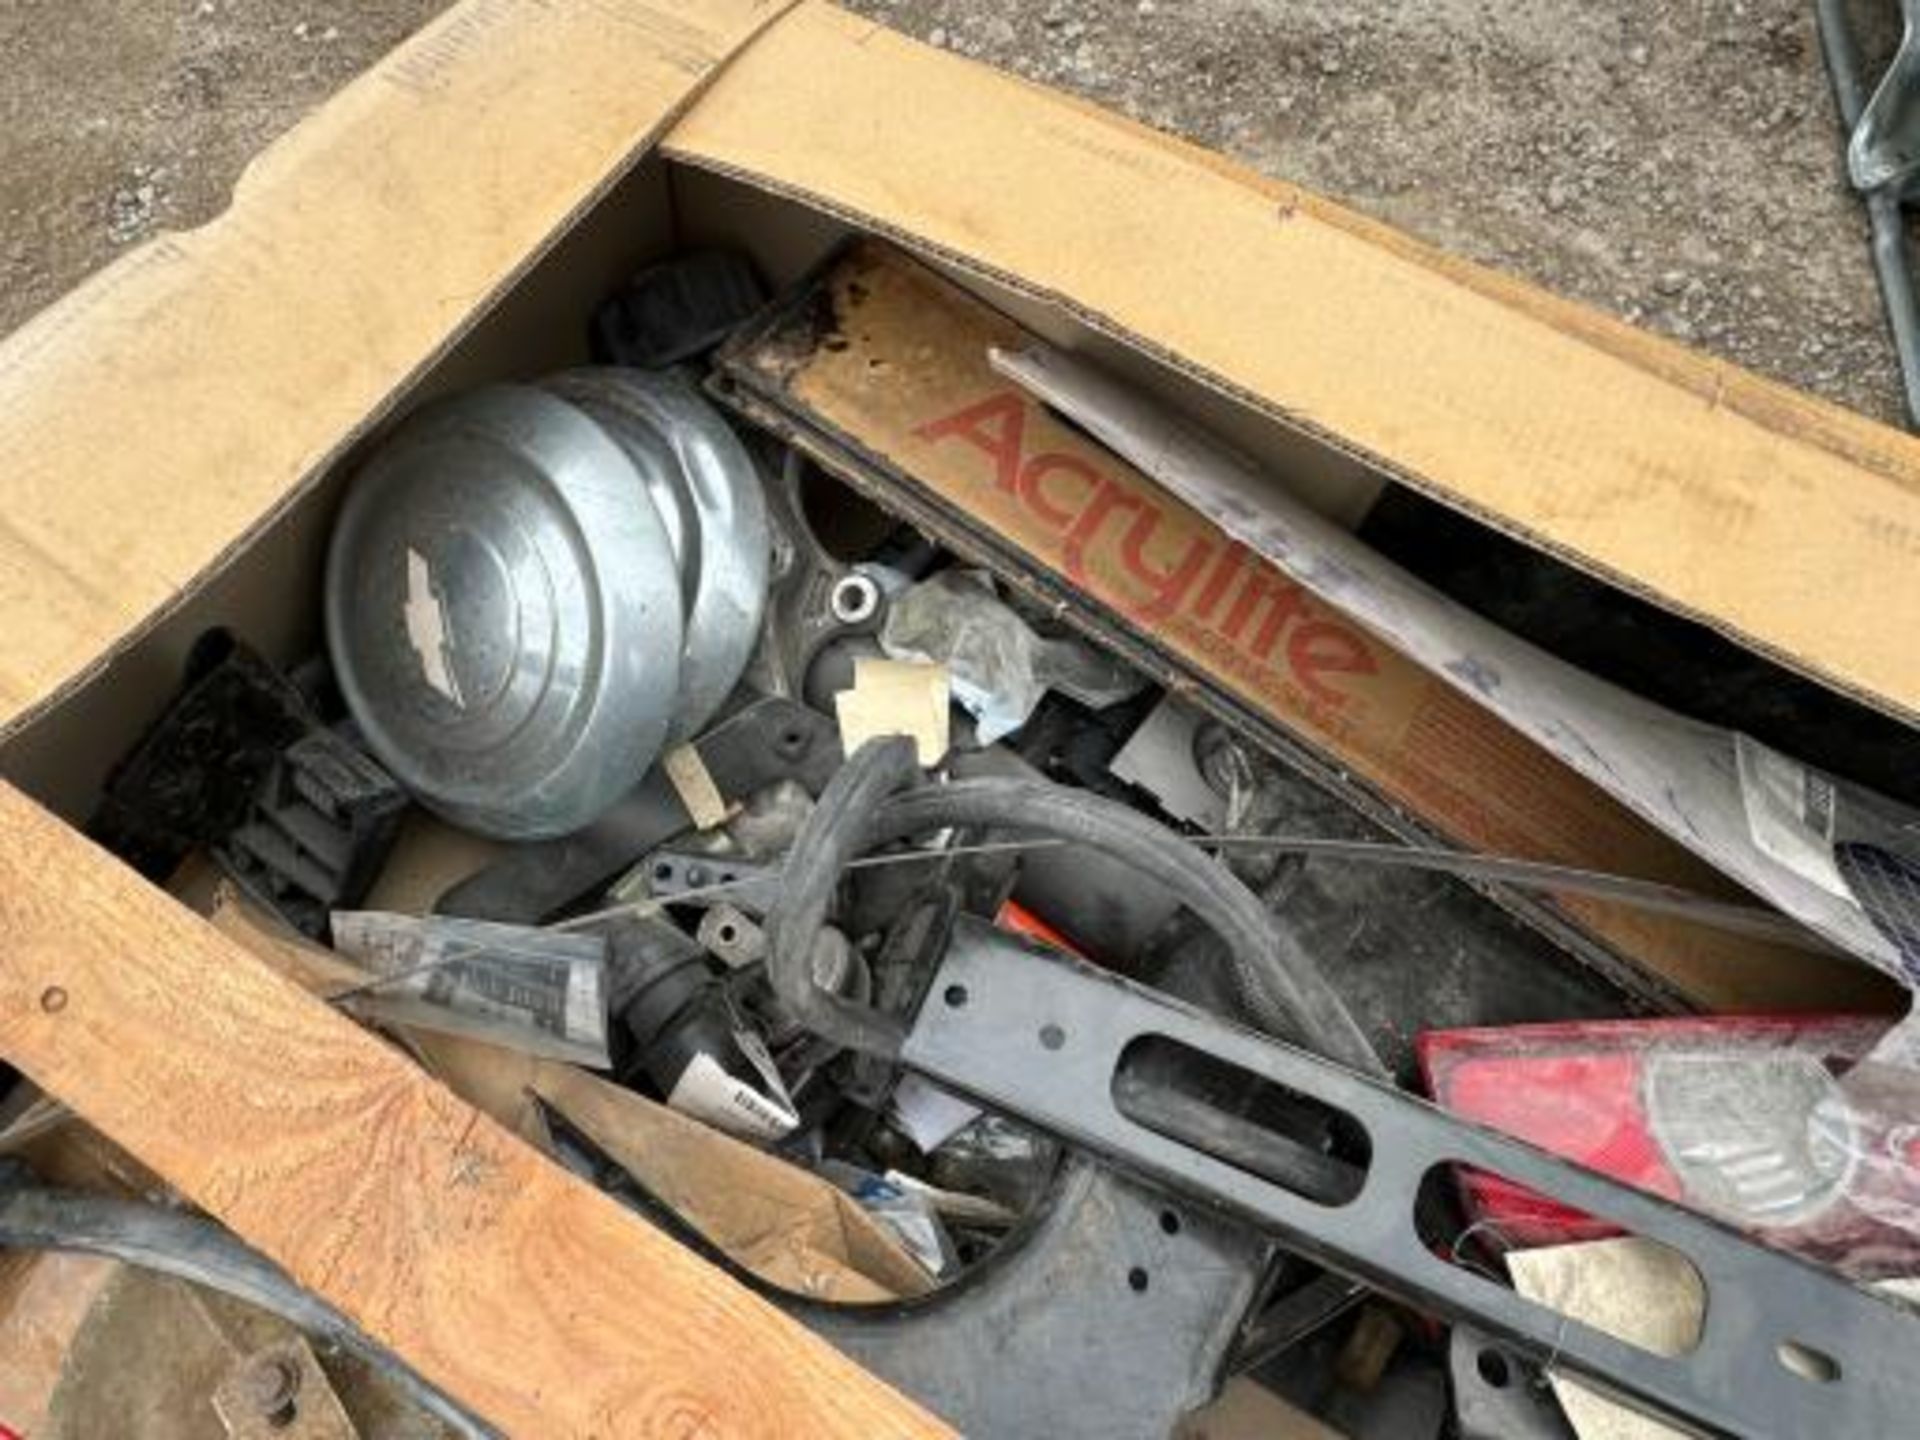 Assorted Truck Parts- Lights, Hub Covers & Miscellaneous. - Image 2 of 5